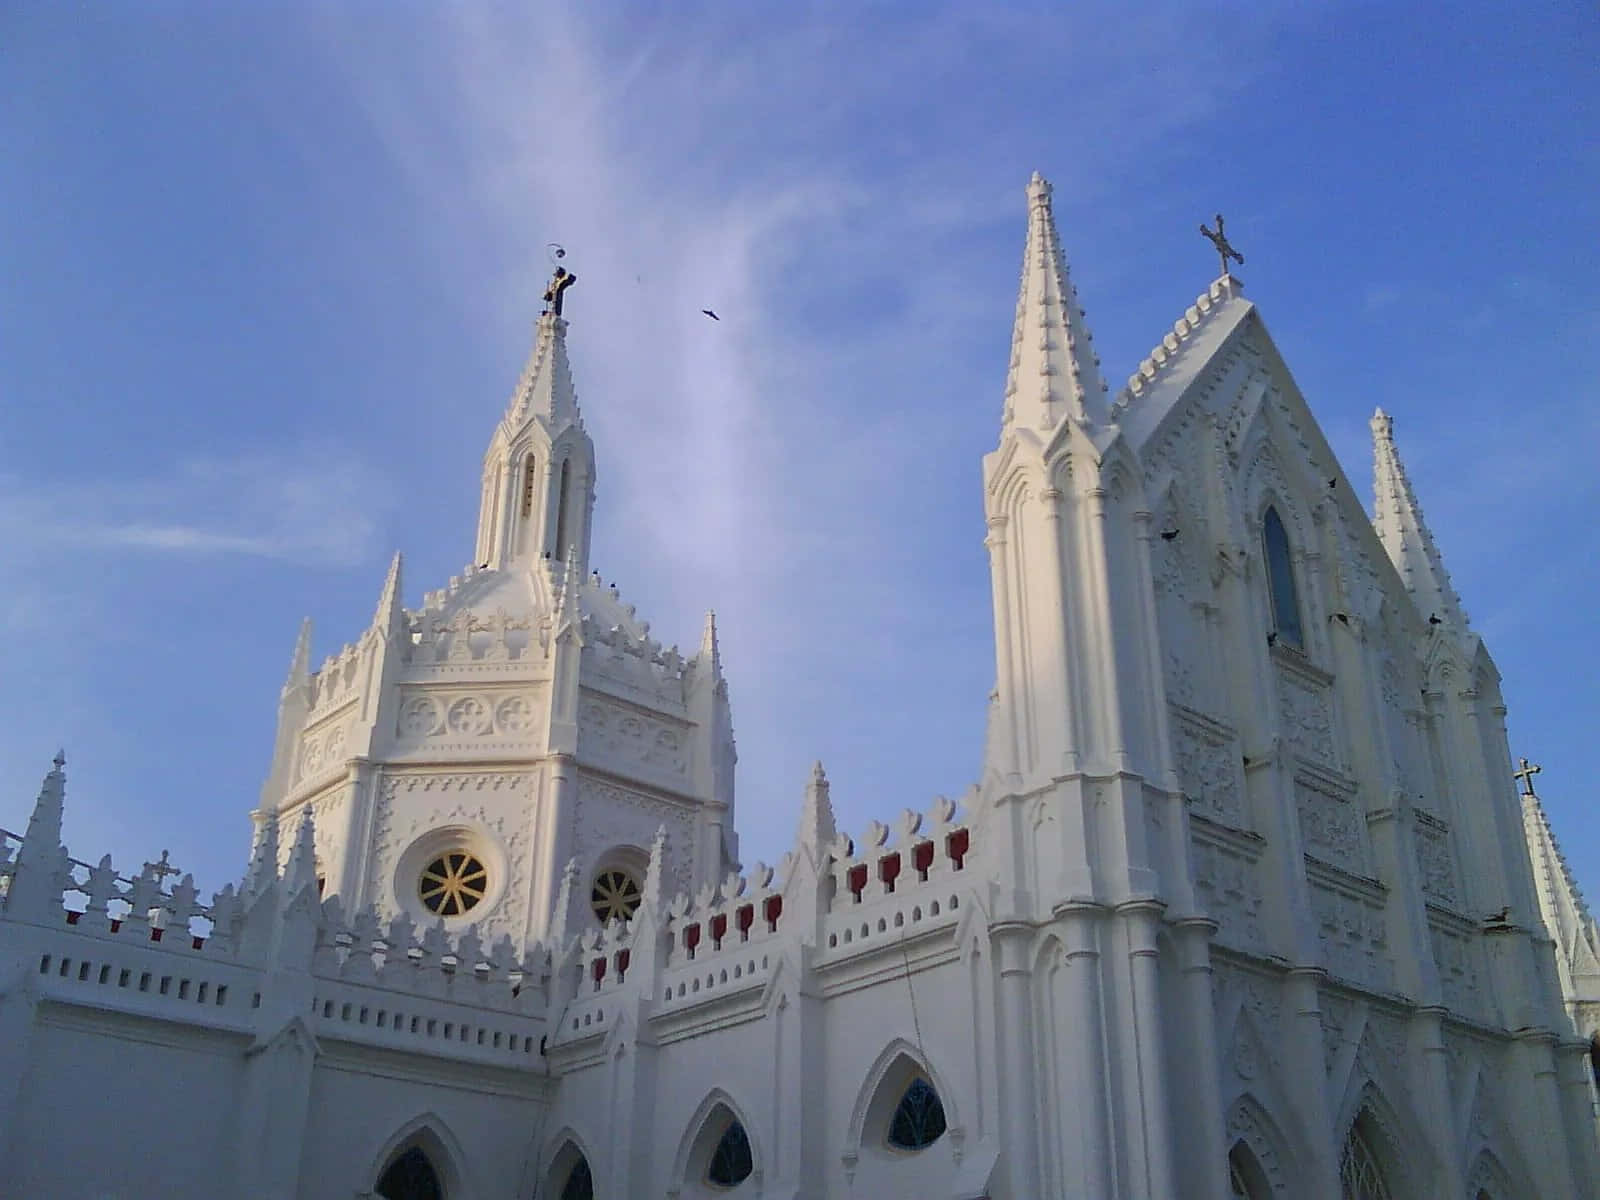 Experience the splendid beauty of a majestic Church.